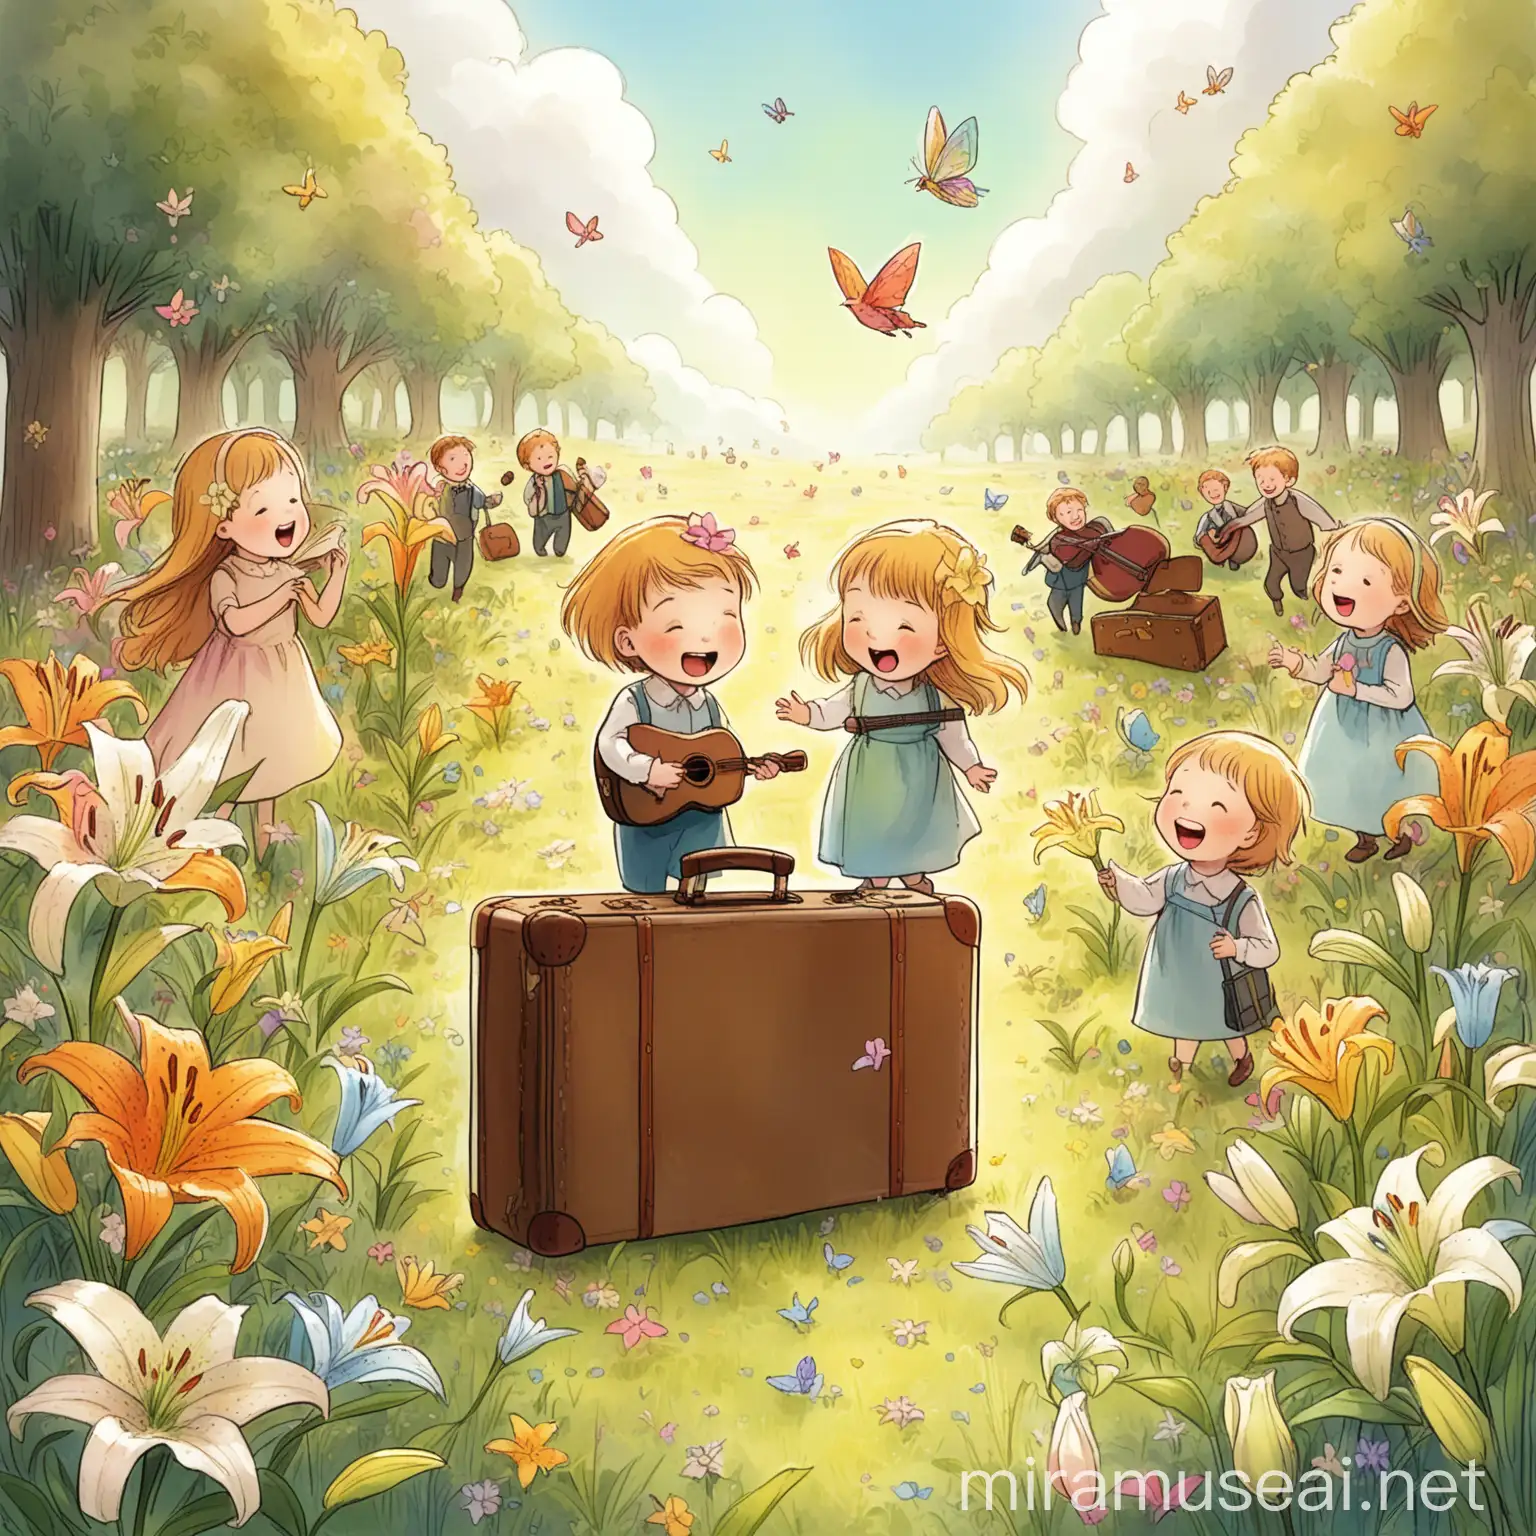 Singing Flowers! Lily and Arthur followed the sweetest flower song, but it led them to a field of giggling creatures! The whispering suitcase sighed. "Wrong way!" it said softly.
